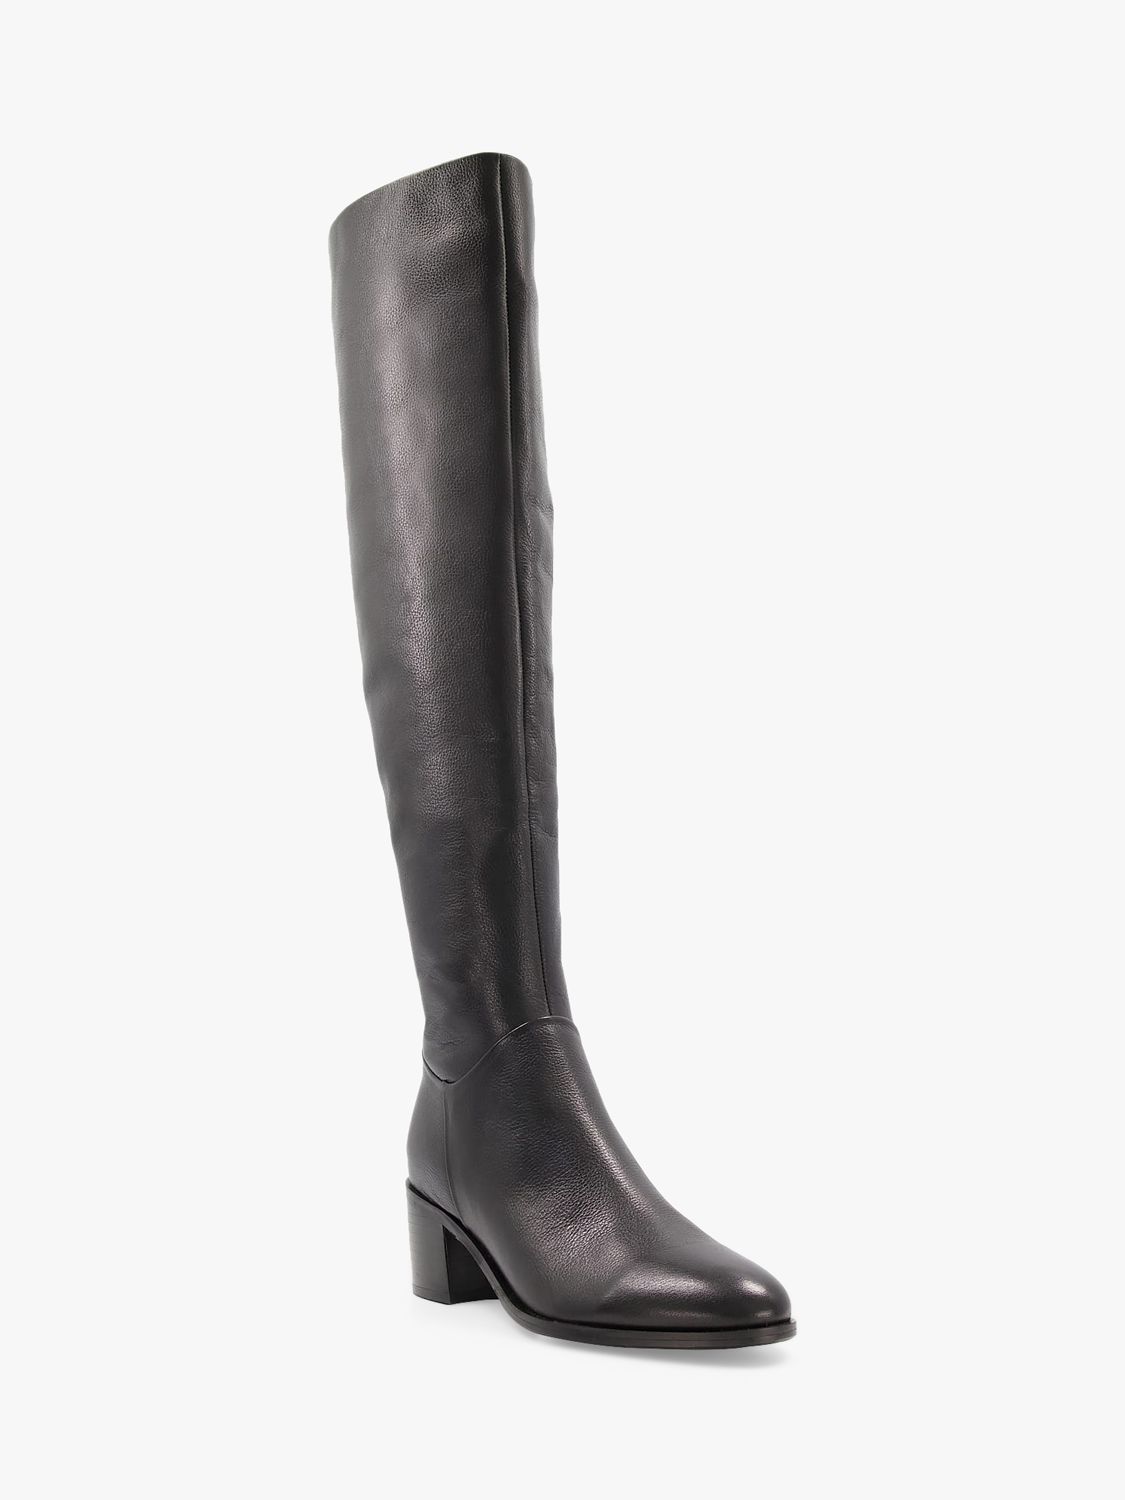 Dune Trinny Leather Knee Boots, Black